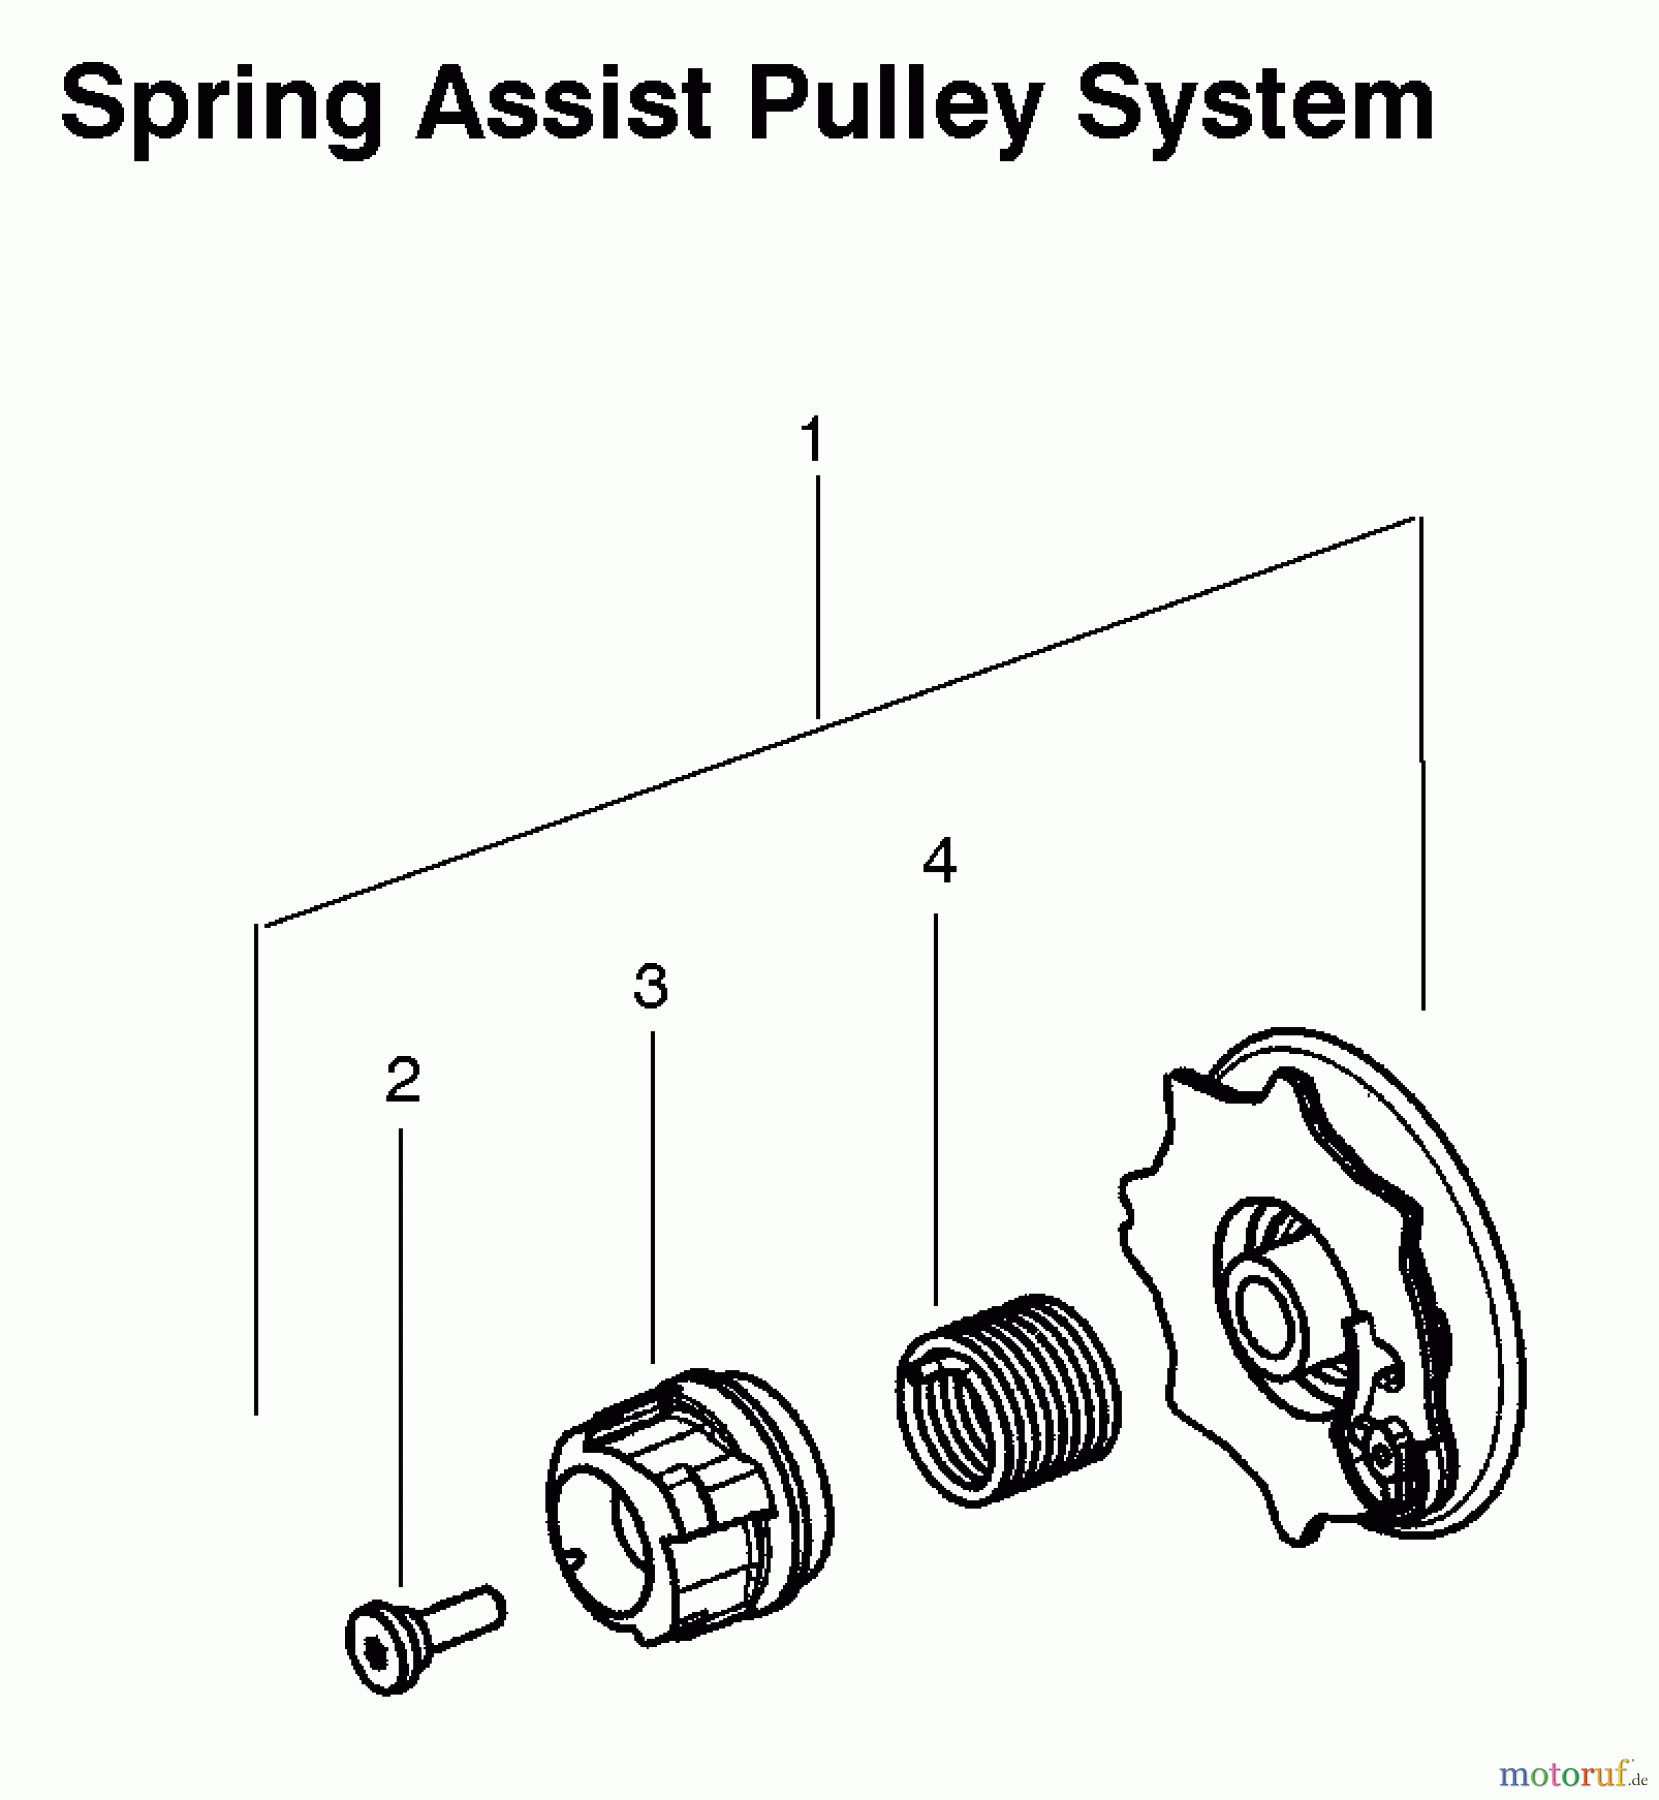  Poulan / Weed Eater Motorsägen P3314 (Type 2) - Poulan Chainsaw Spring Assist Pulley System